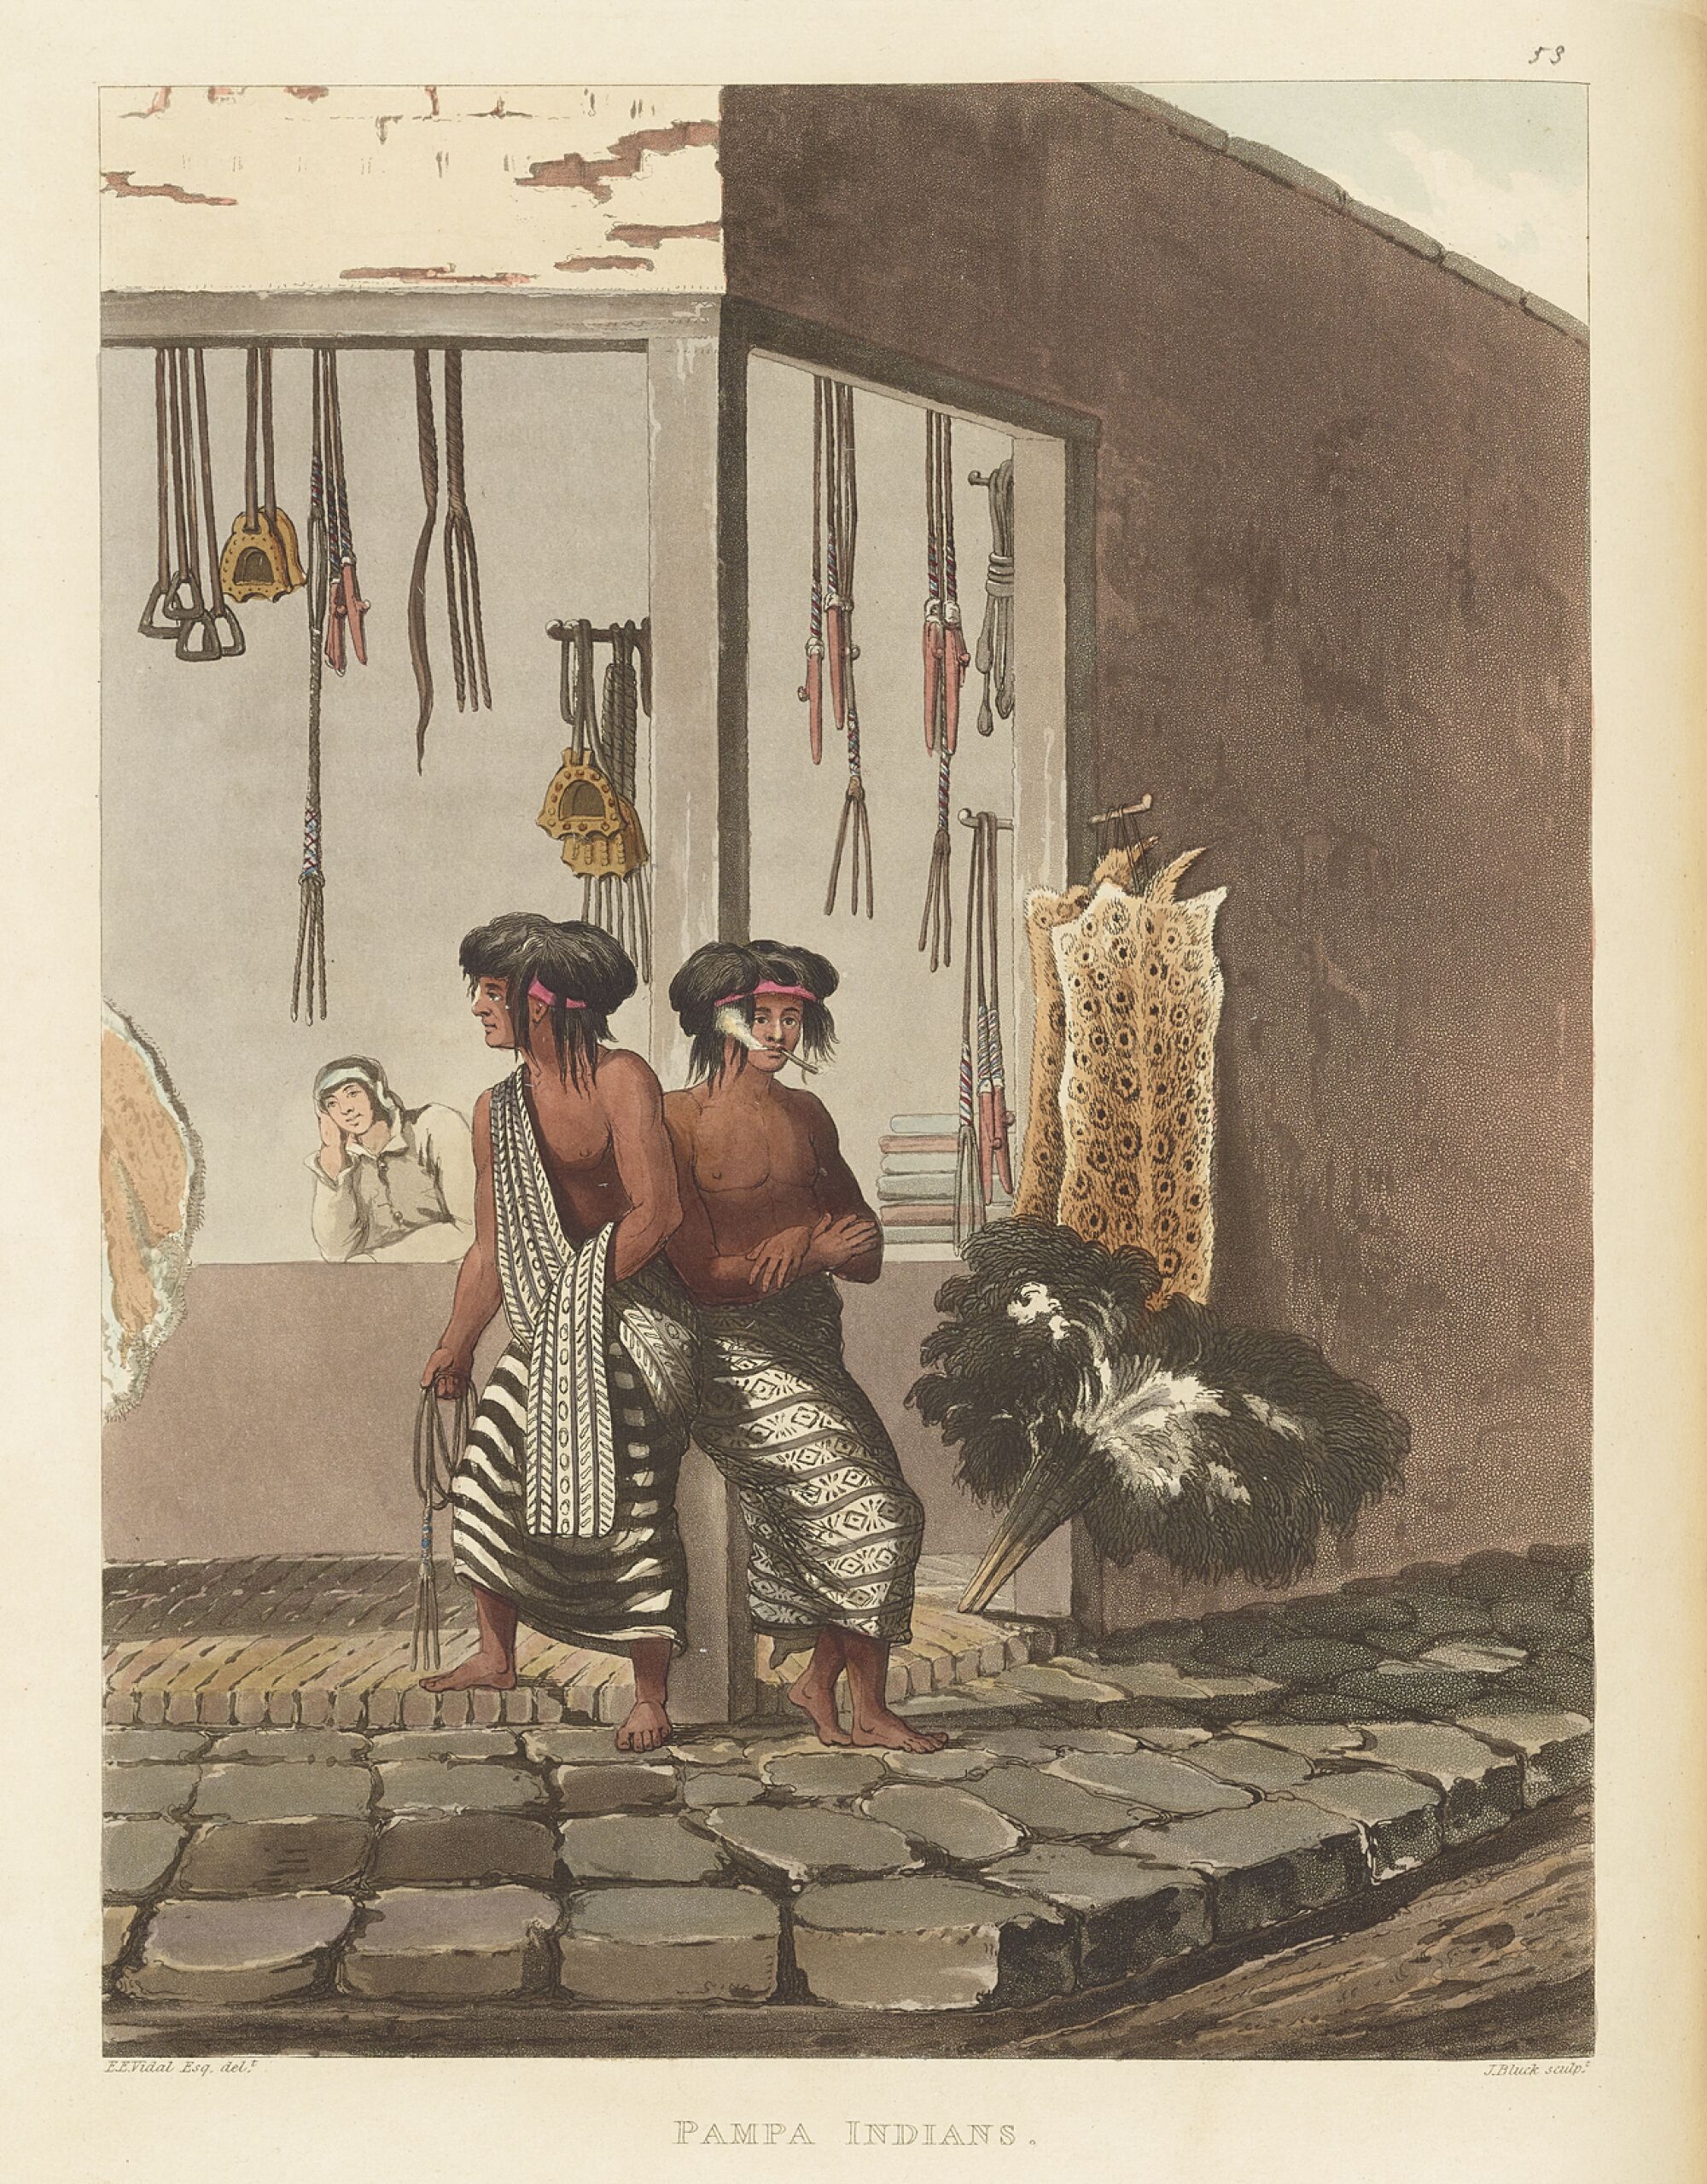 Two Indigenous men in wearing traditional textiles in a geometric print stand on a cobblestone street corner